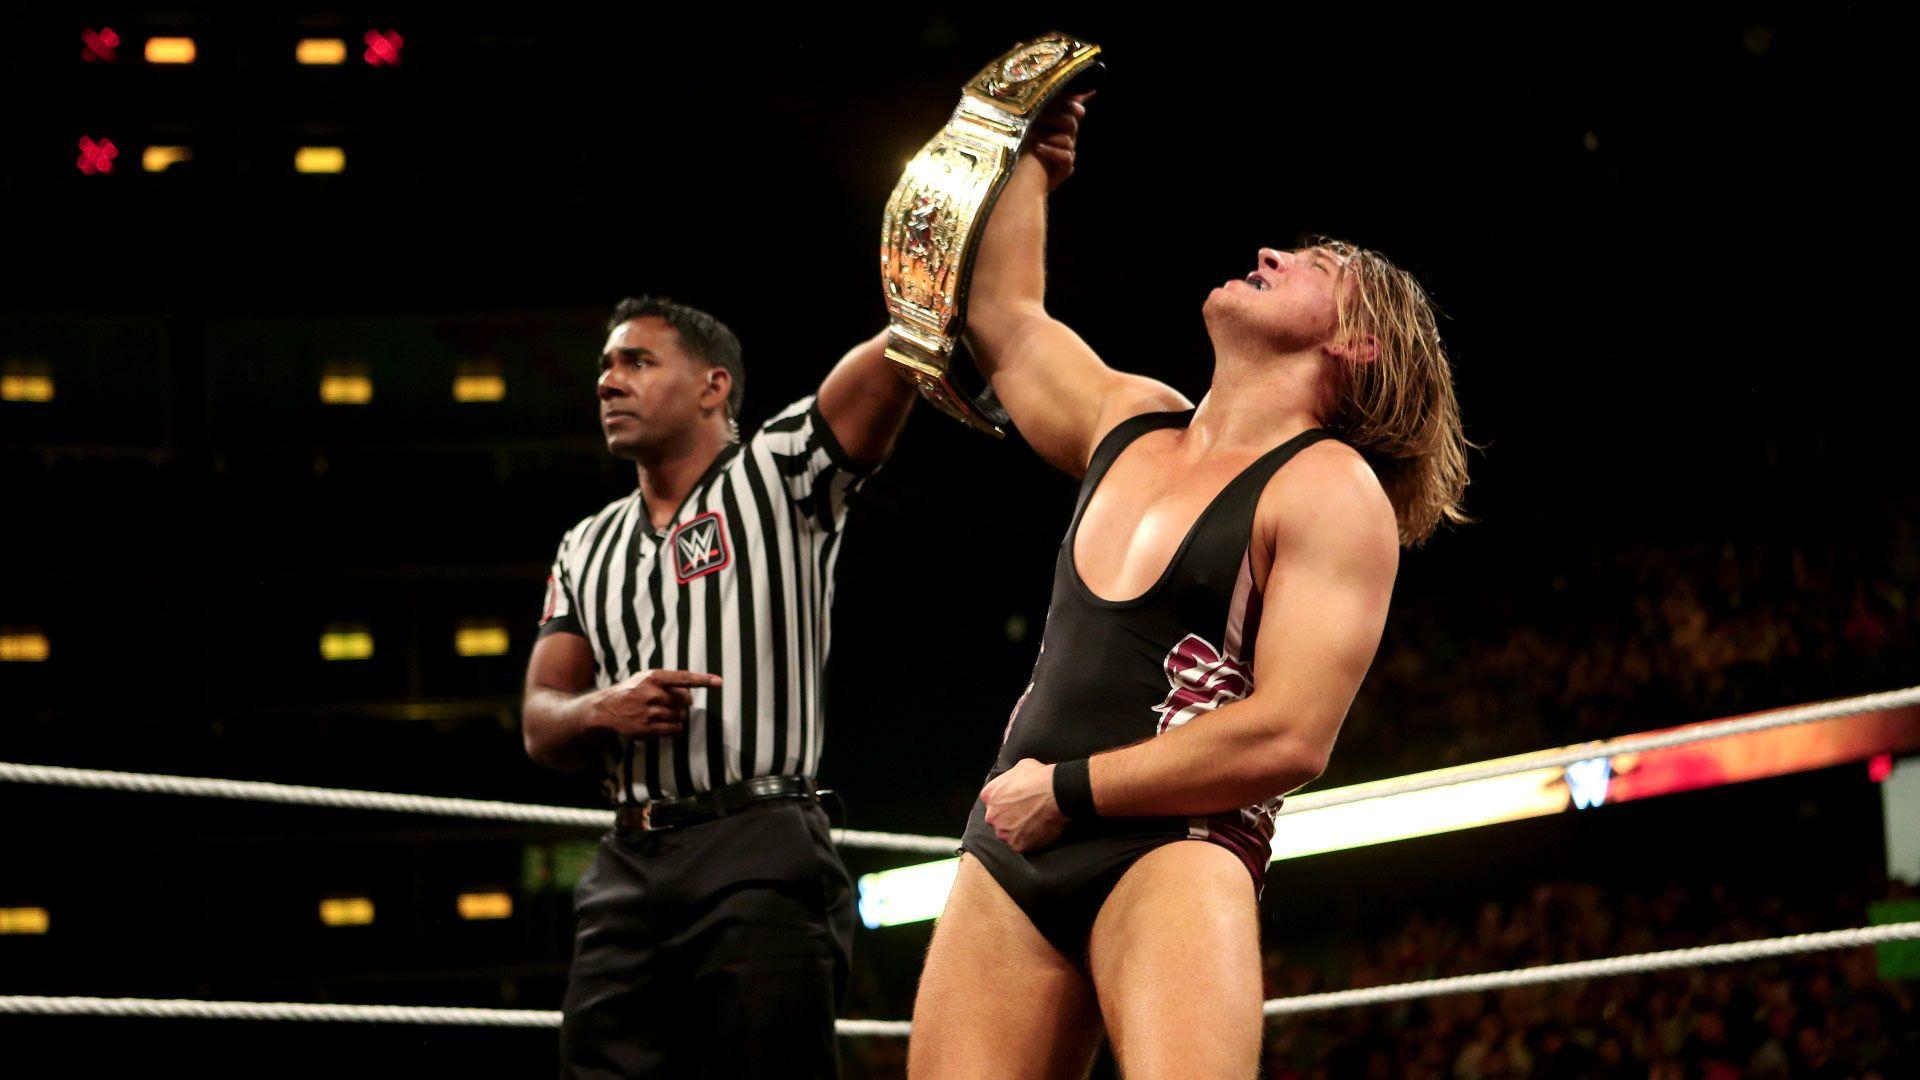 Pete Dunne def. Tyler Bate to win the WWE United Kingdom